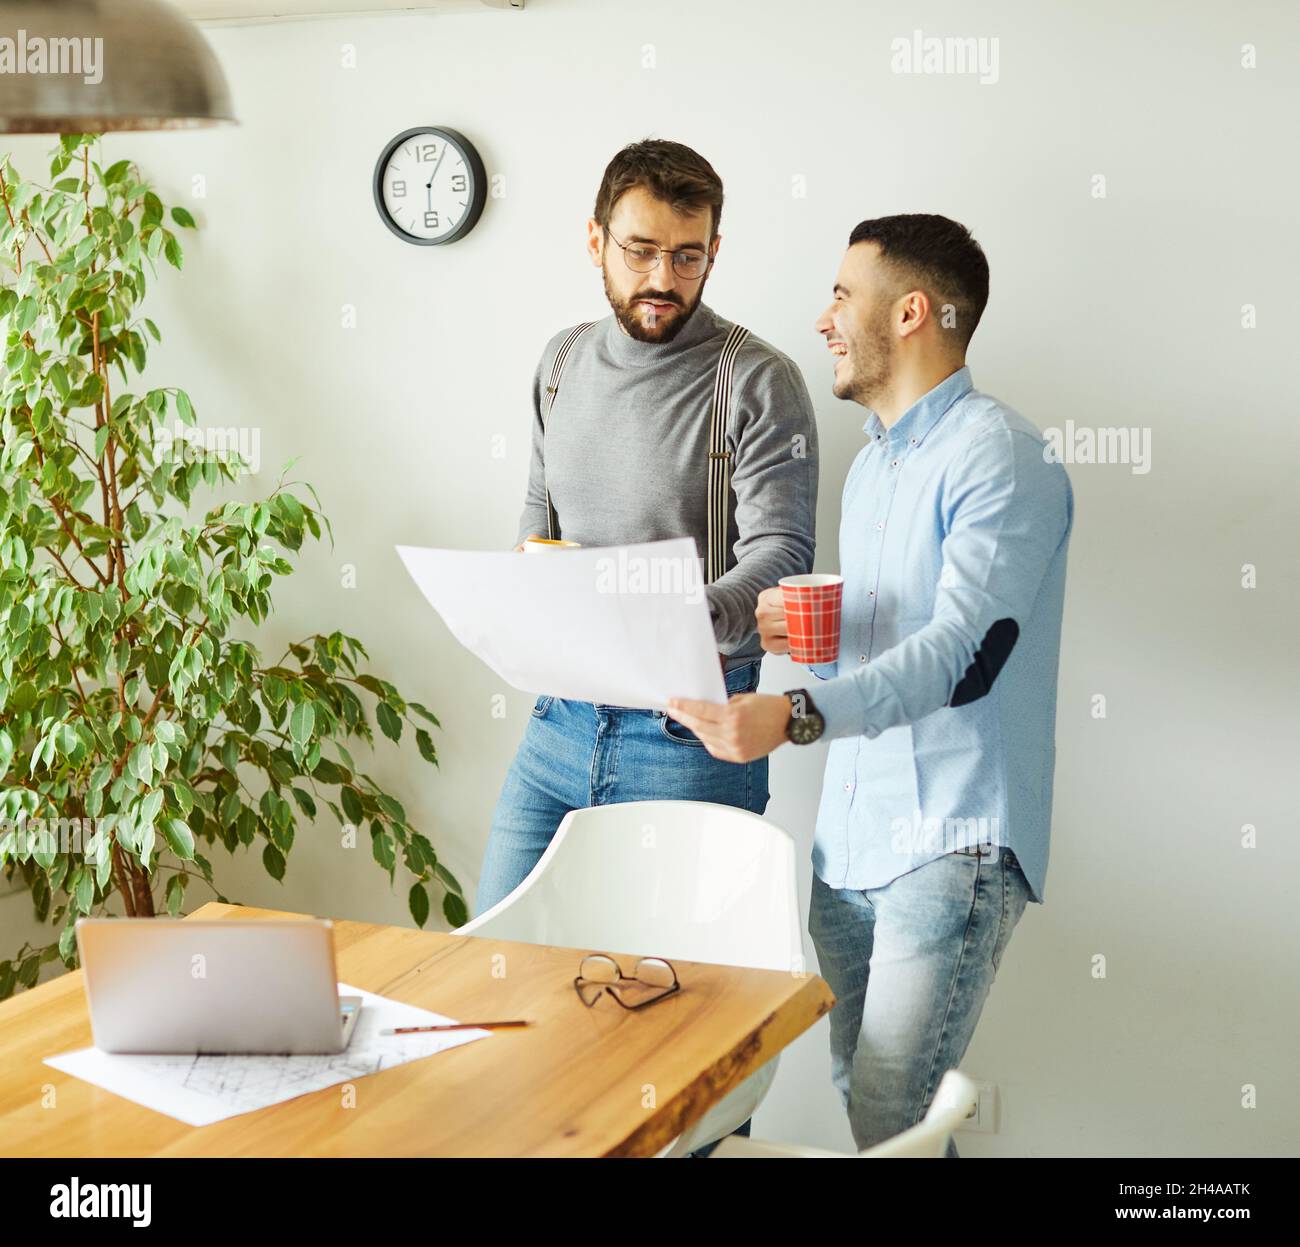 young business people meeting office teamwork happy success corporate discussion casual startup desk Stock Photo